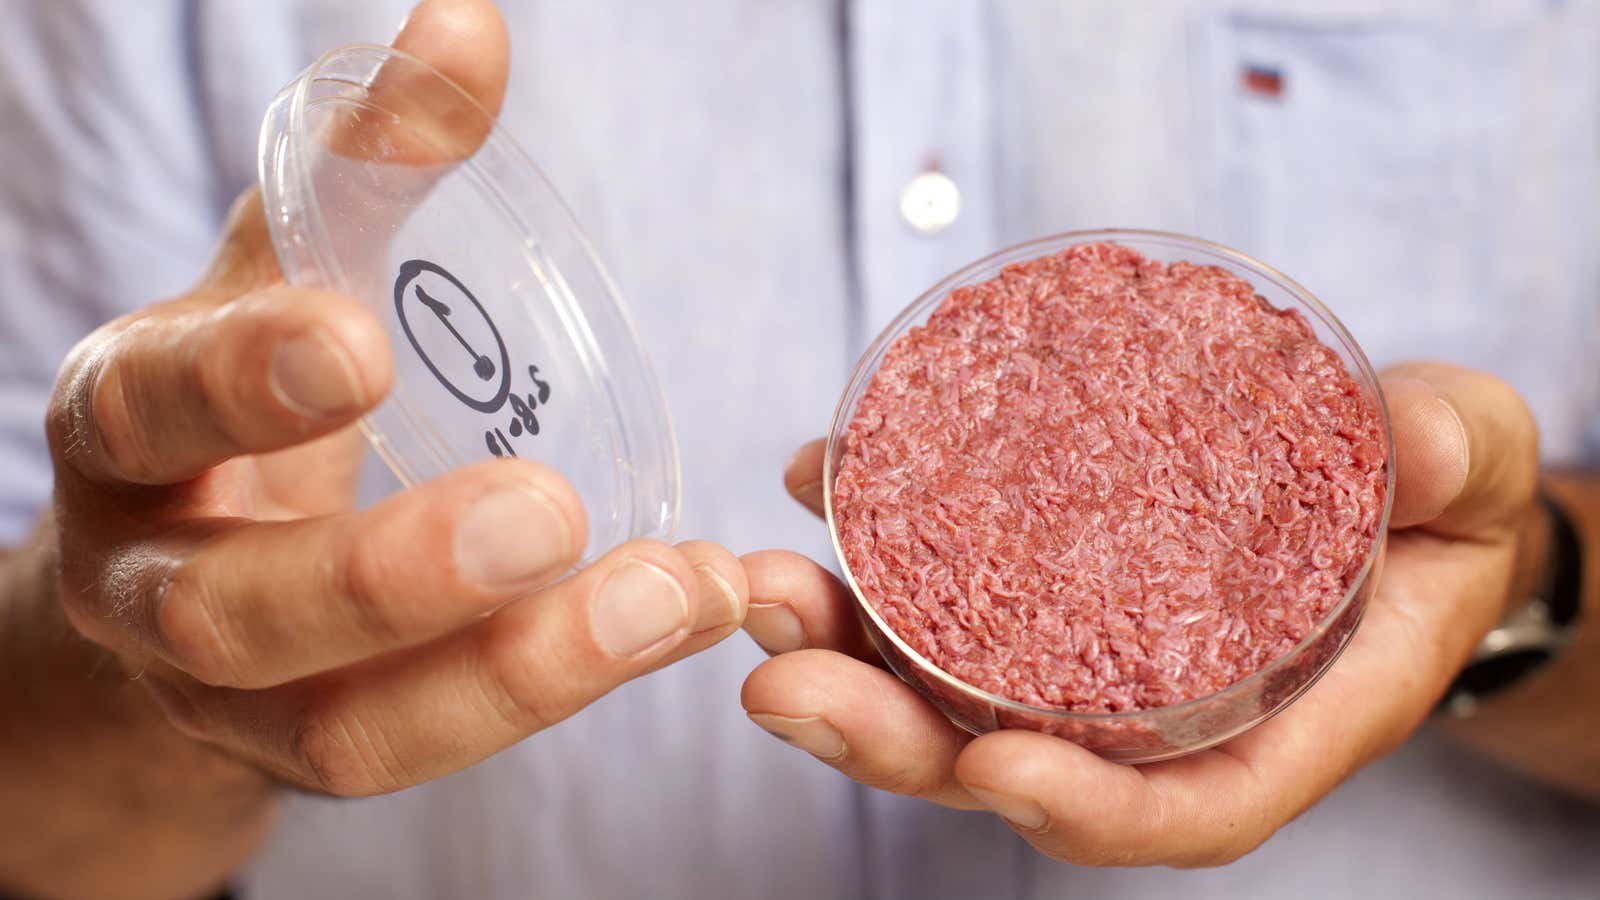 Clean meat just got a step closer to the market.